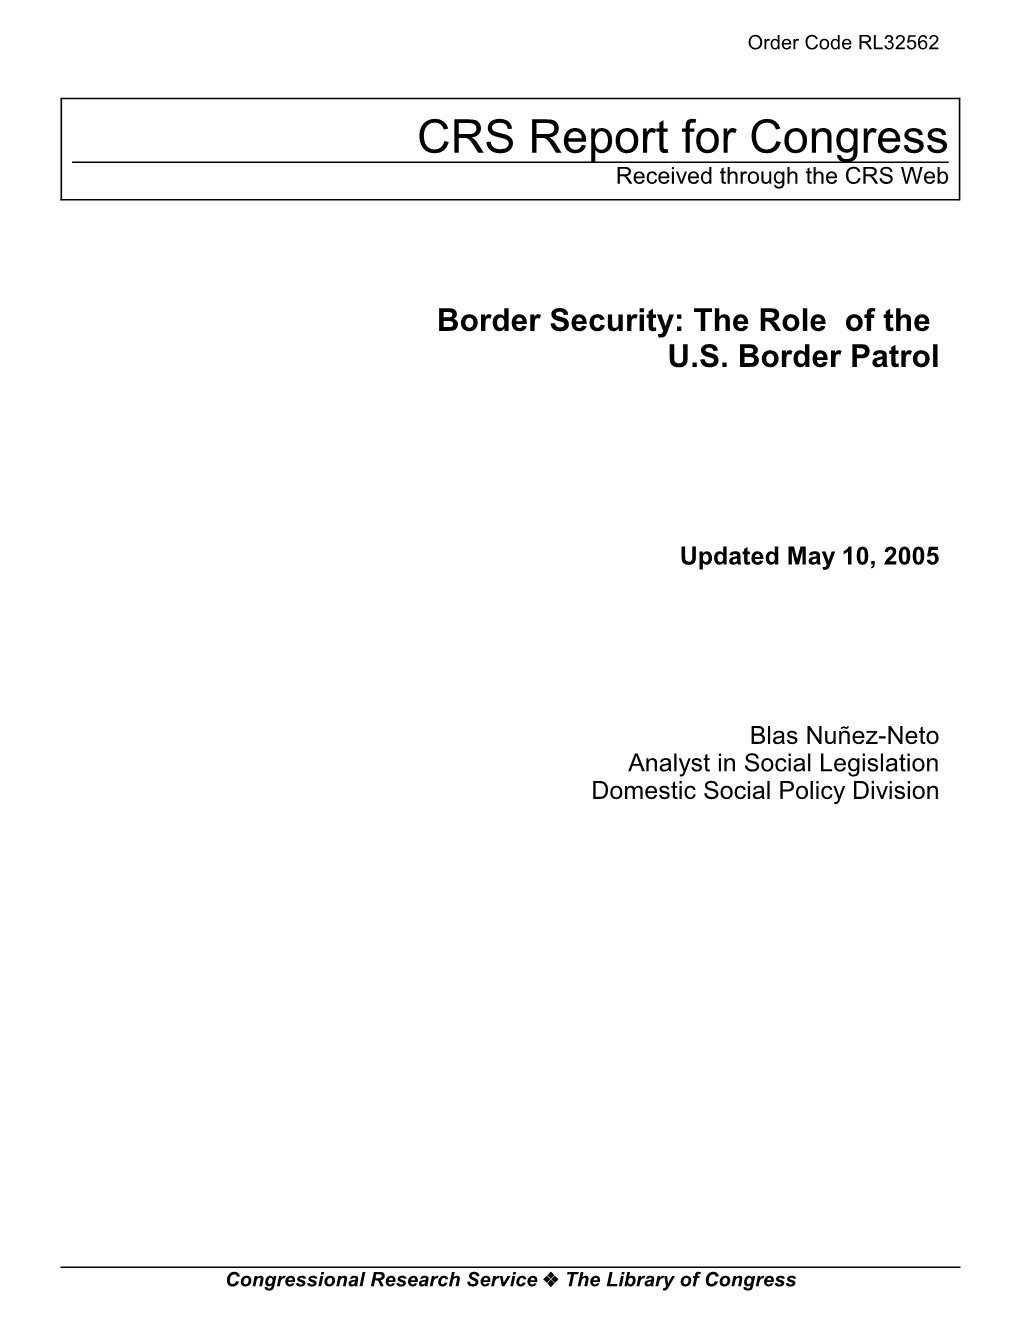 Border Security: the Role of the U.S. Border Patrol